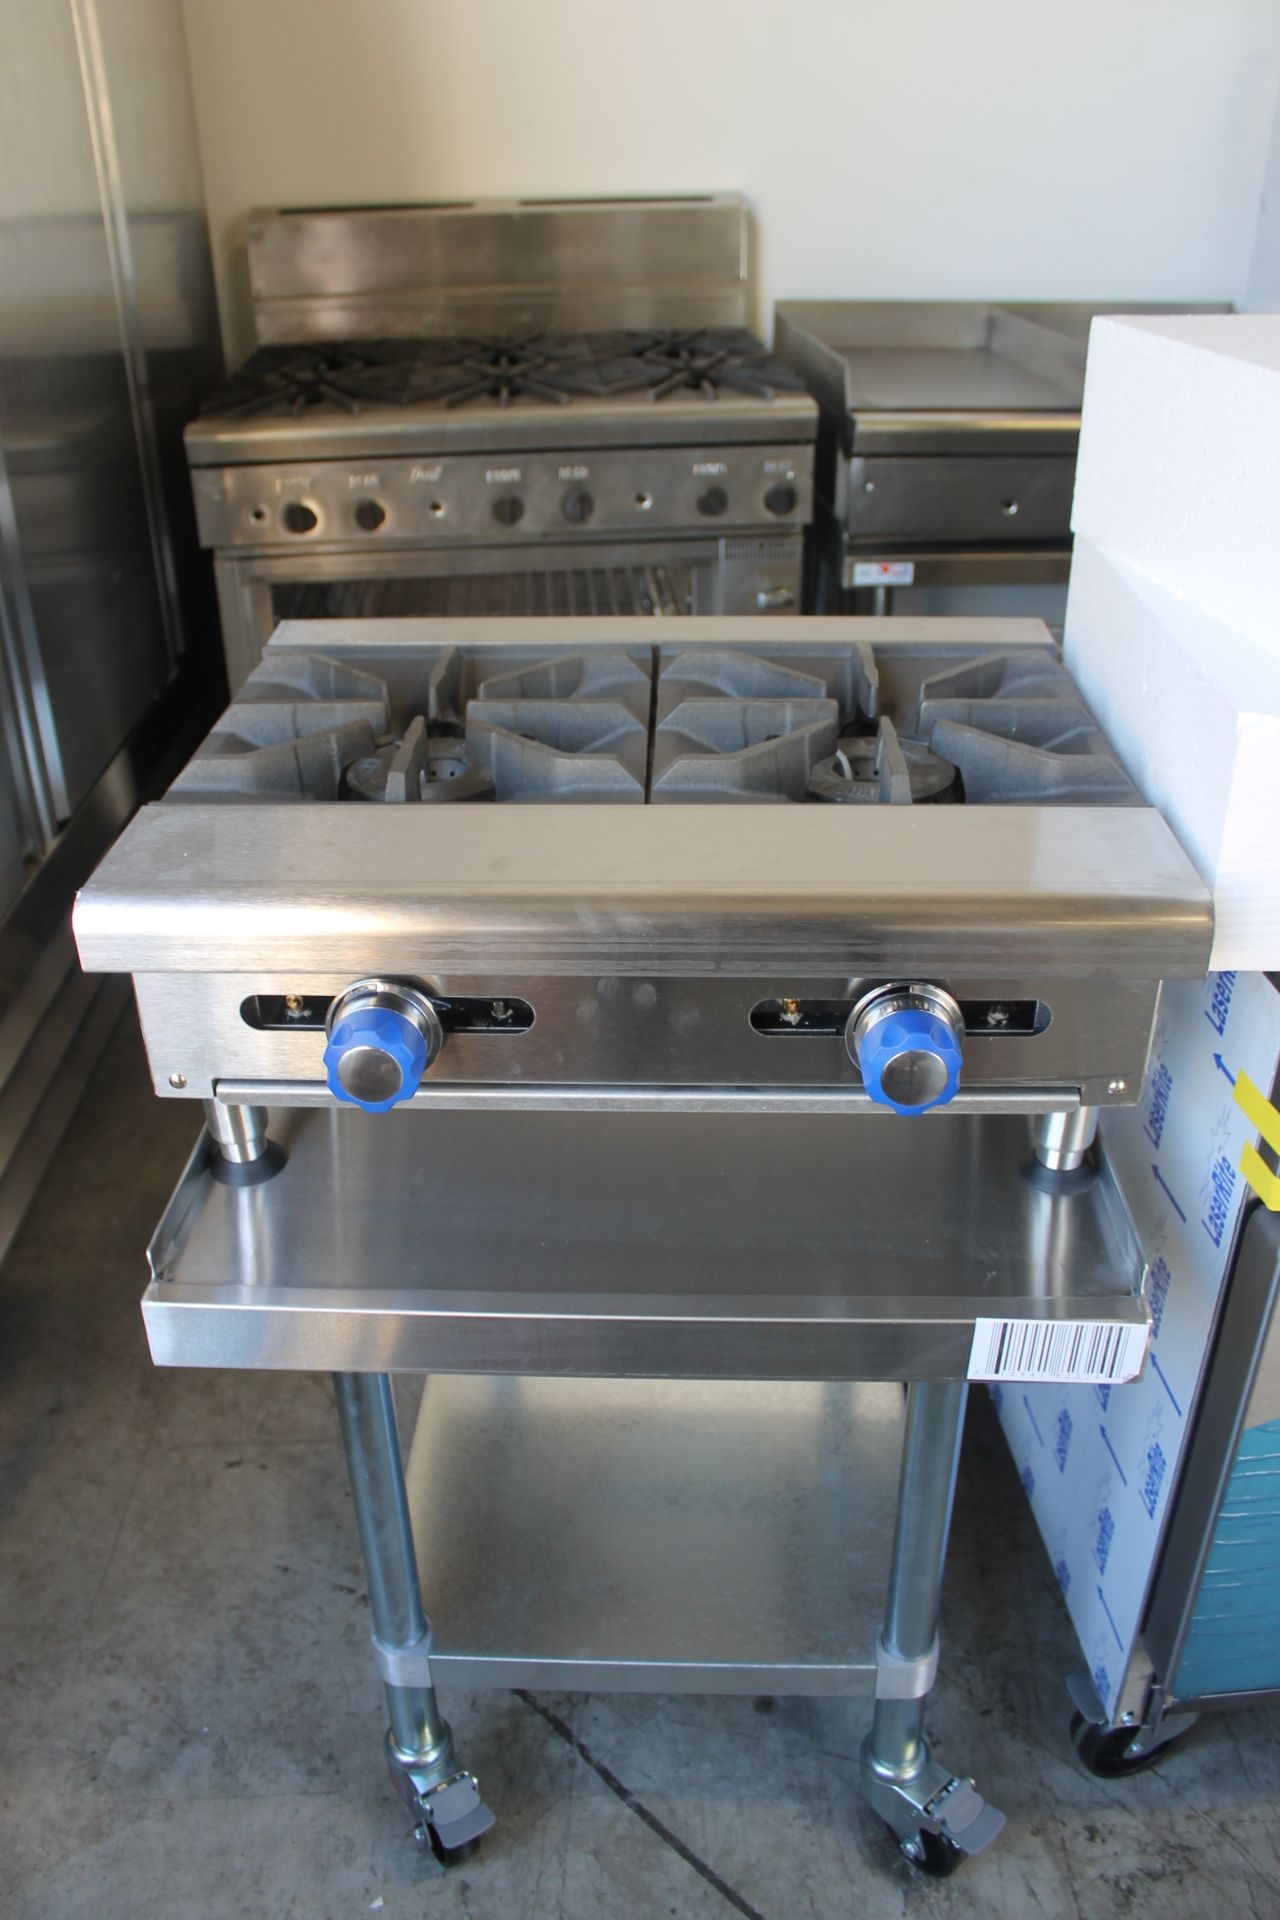 Imperial 2 Burner Hot Plate model IHPA-2-24 with 24" Equipment Stand & Casters - Natural Gas - New